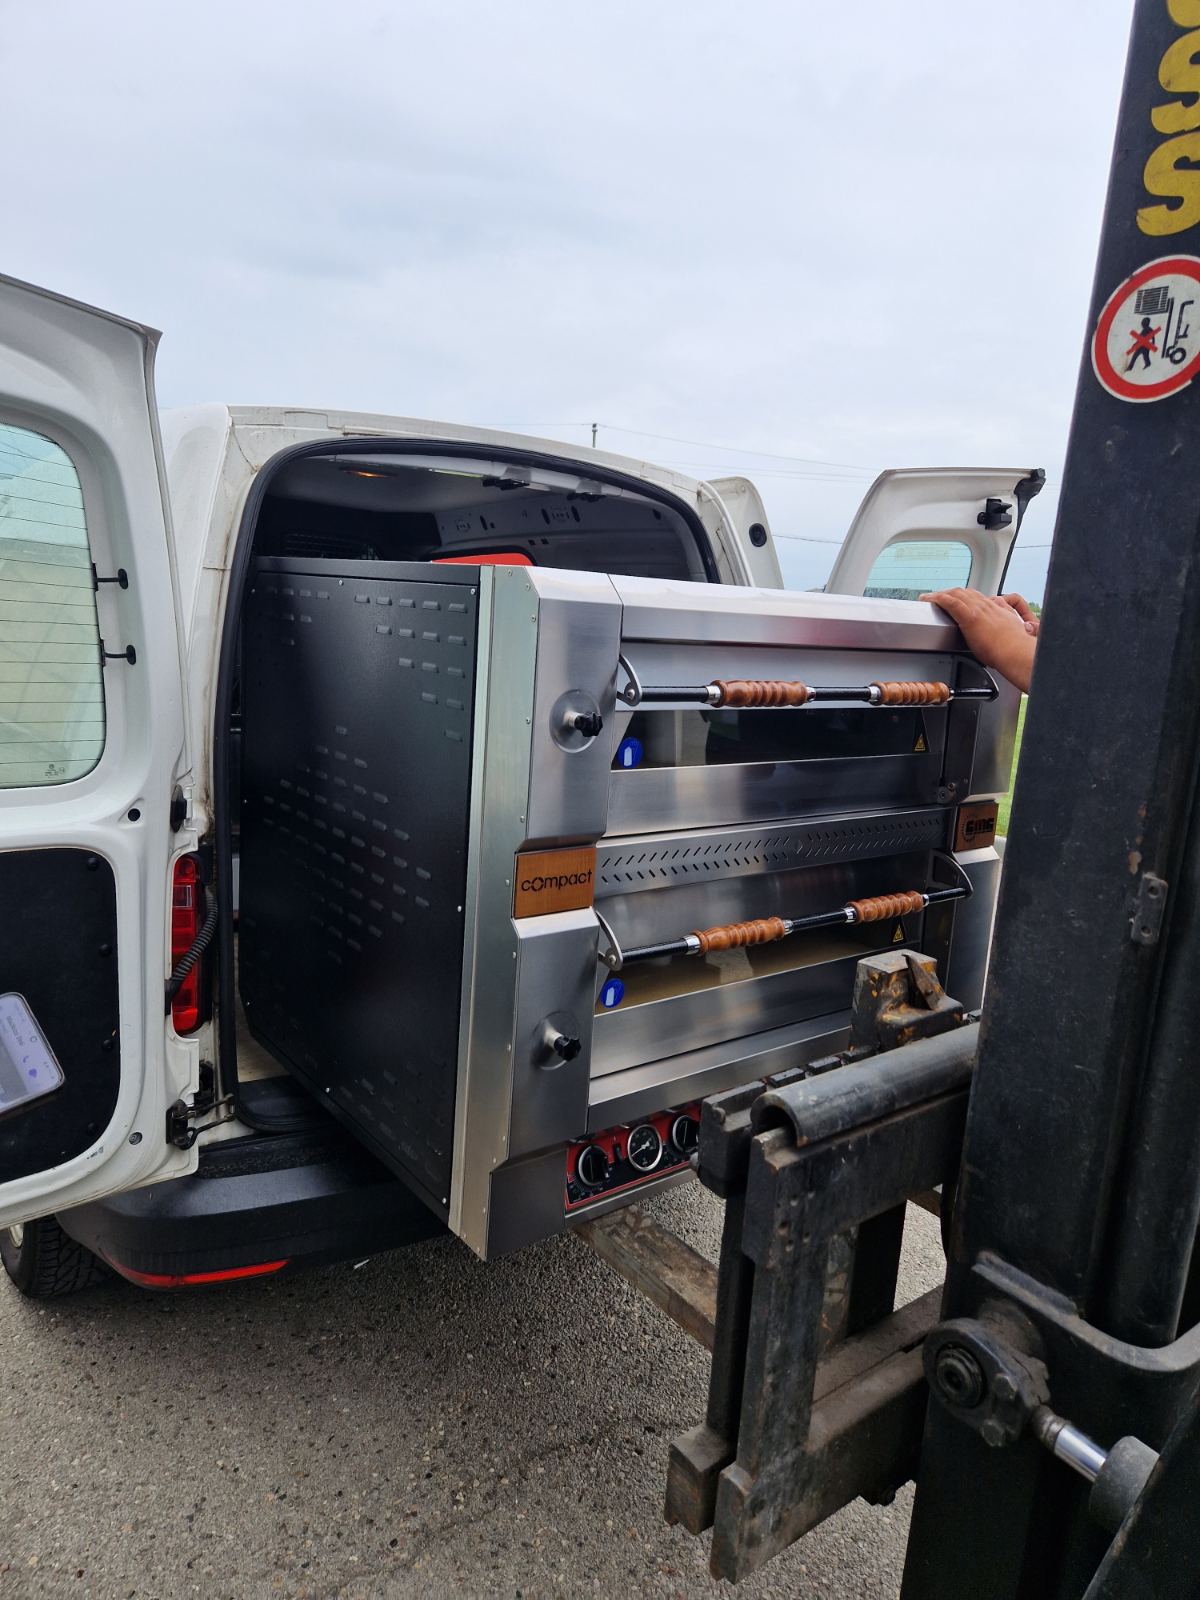 Delivery of Pizza oven for Belgrade, Serbia